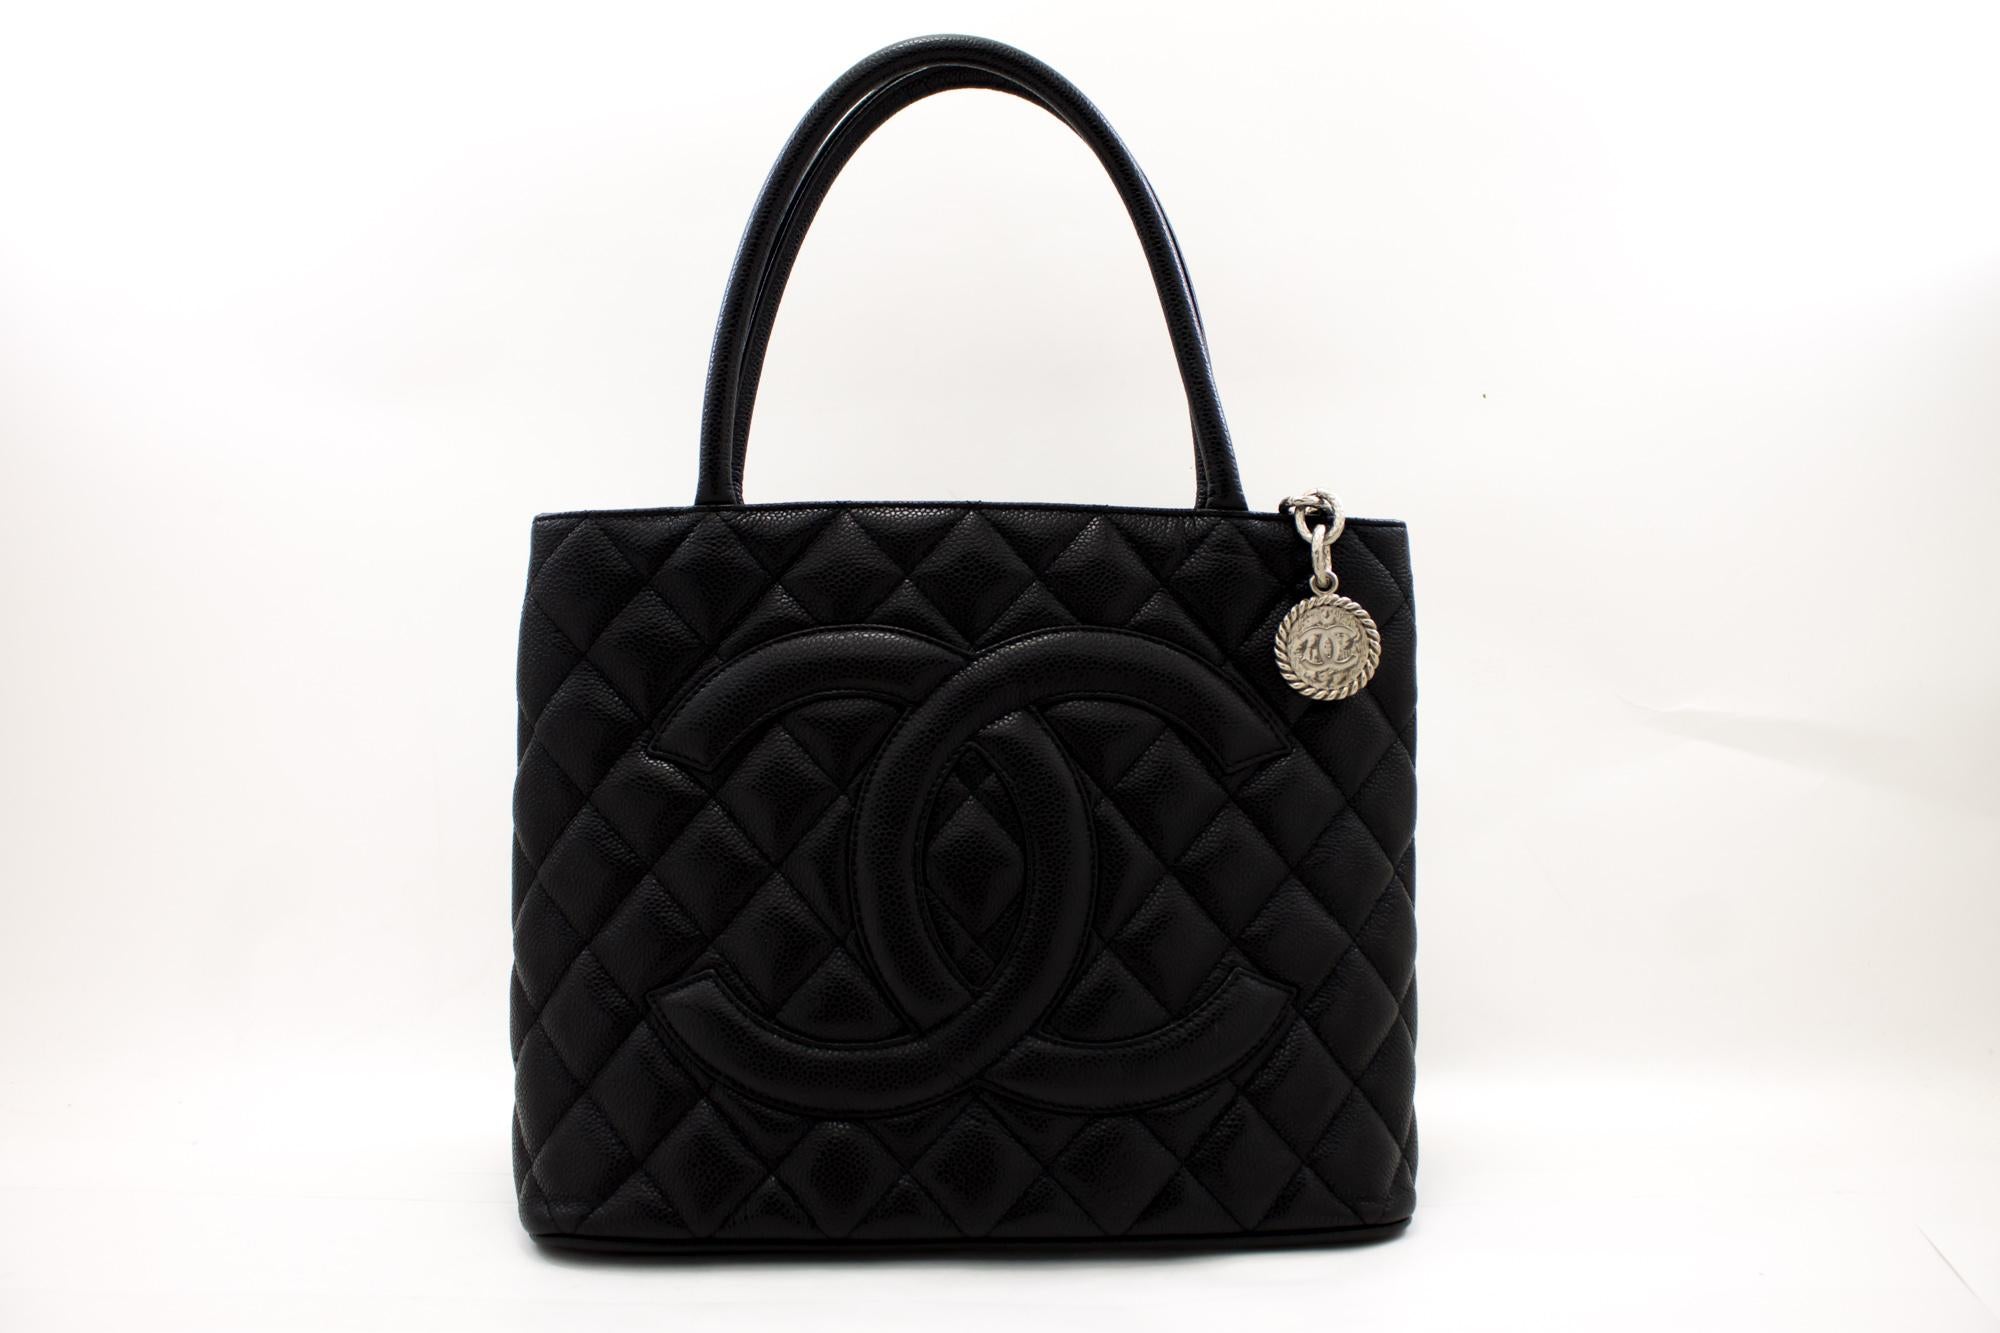 An authentic CHANEL Silver Medallion Caviar Shoulder Bag Shopping Tote Black. The color is Black. The outside material is Leather. The pattern is Solid. This item is Contemporary. The year of manufacture would be 2009.
Conditions & Ratings
Outside